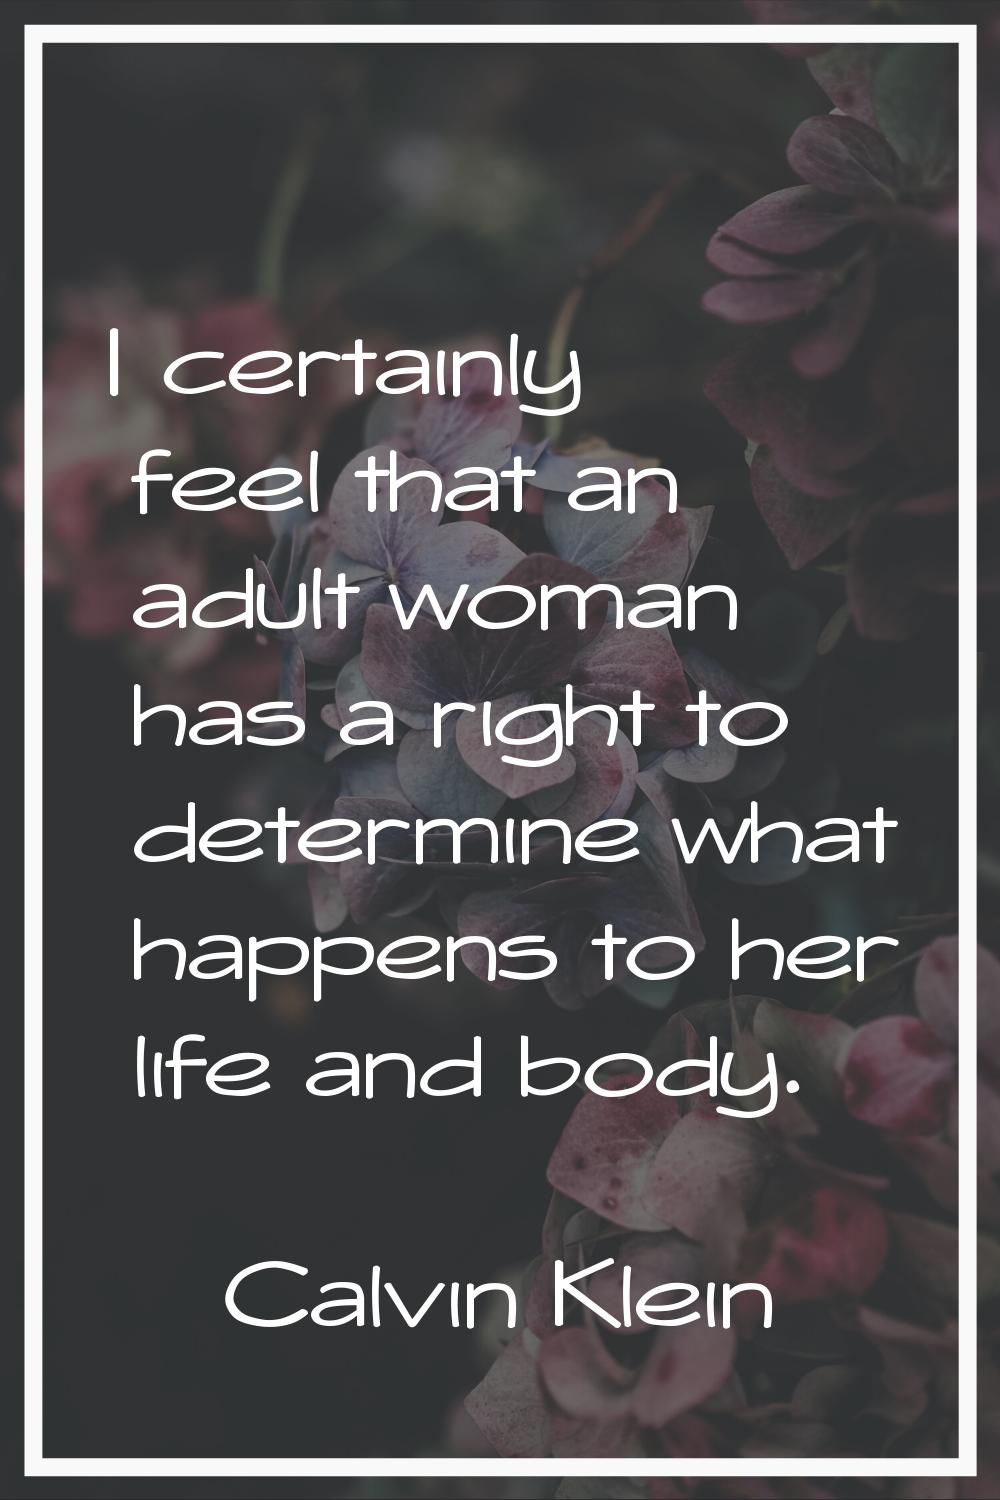 I certainly feel that an adult woman has a right to determine what happens to her life and body.